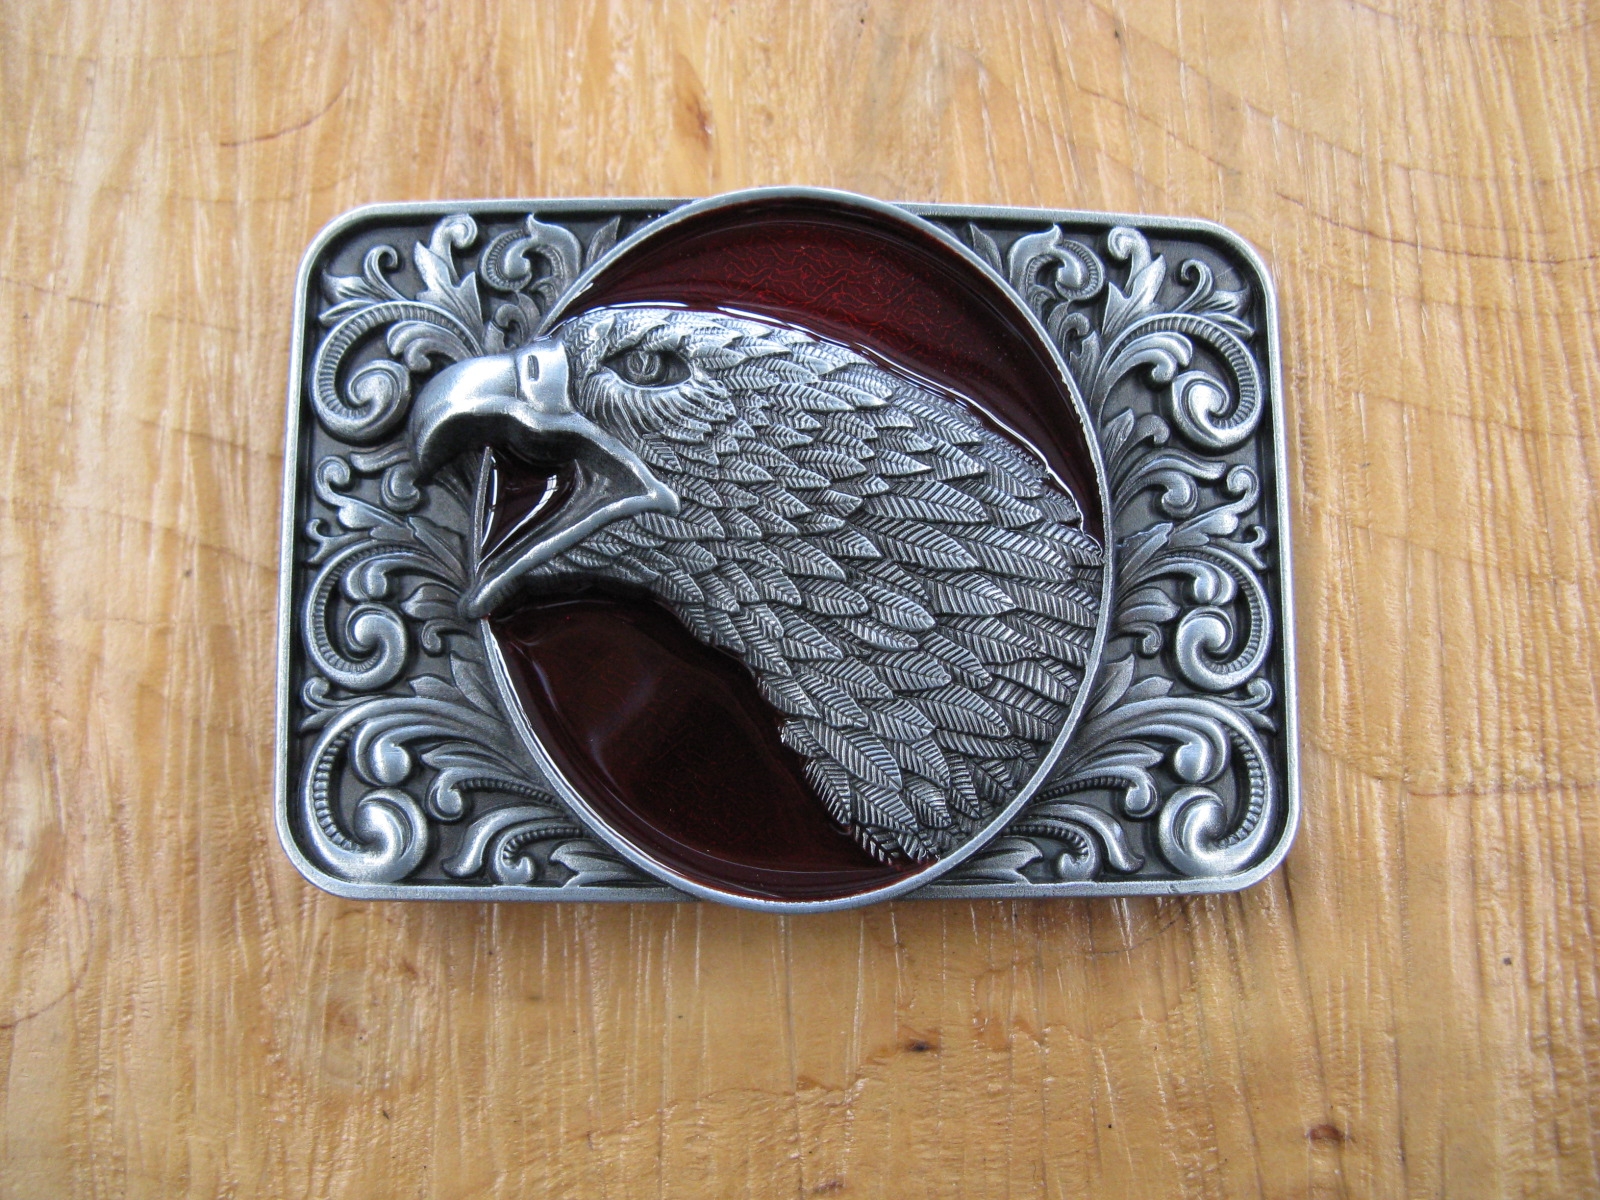 Eagle 40mm Buckle